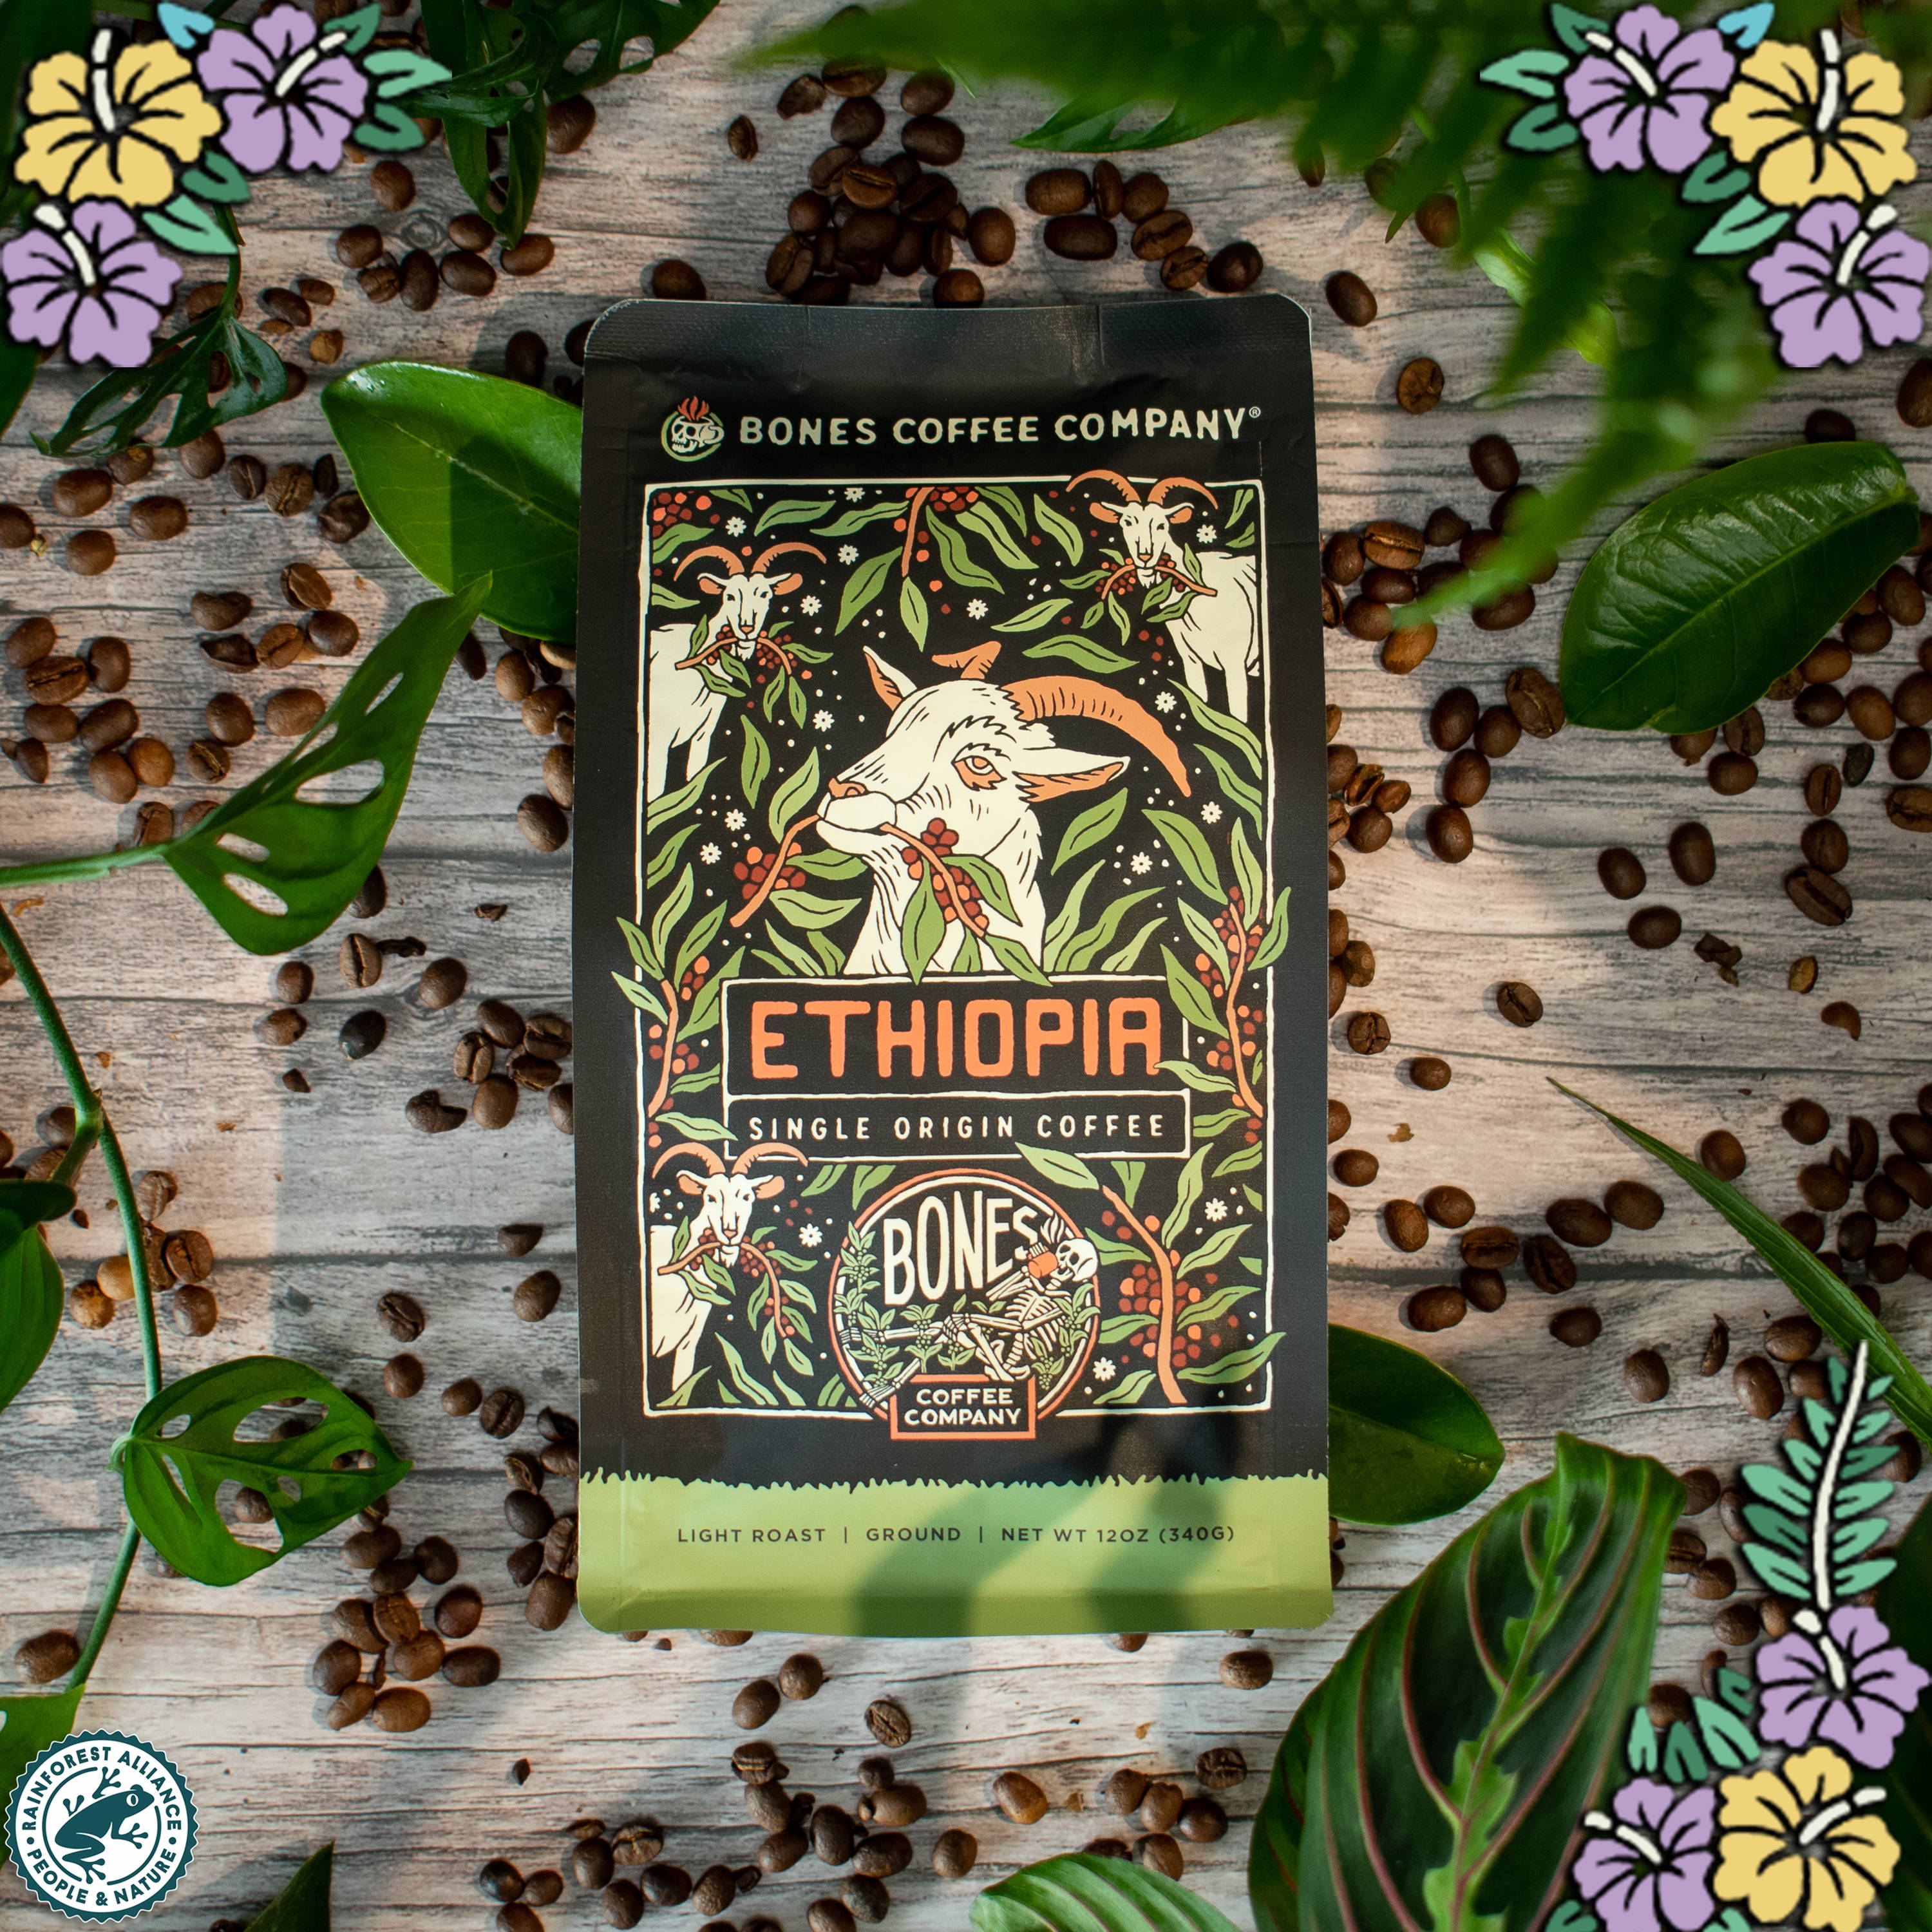 A 12 ounce bag of coffee from Ethiopia that has art of a goat on it. There are flowers in the top left, top right, and bottom right. There's also the logo for the Rainforest Alliance in the bottom left.